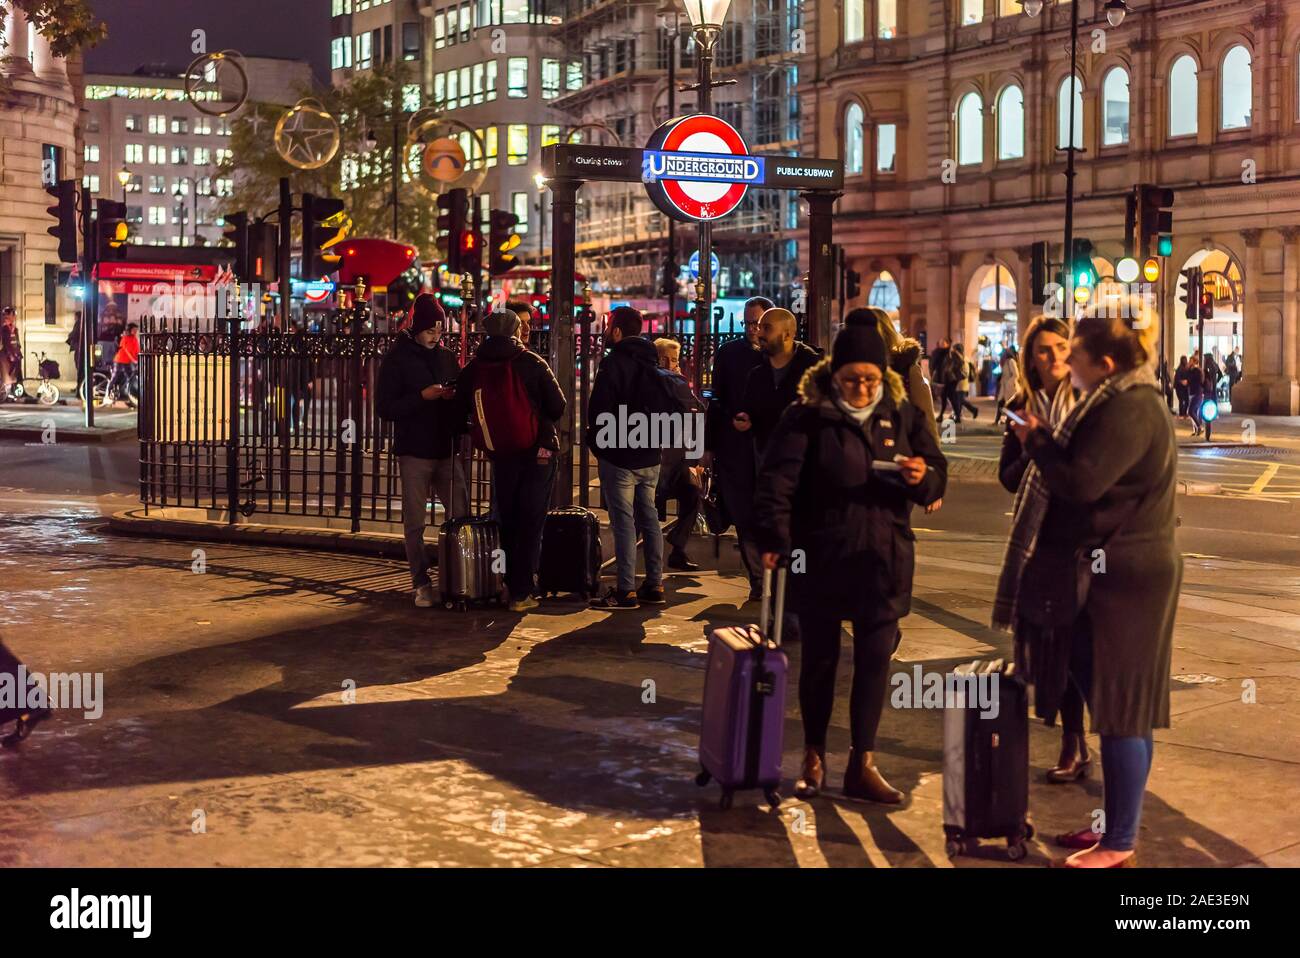 City of London at night. People gathered in Trafalgar Square outside entrance steps to Charing Cross underground station on a cold November evening. Stock Photo